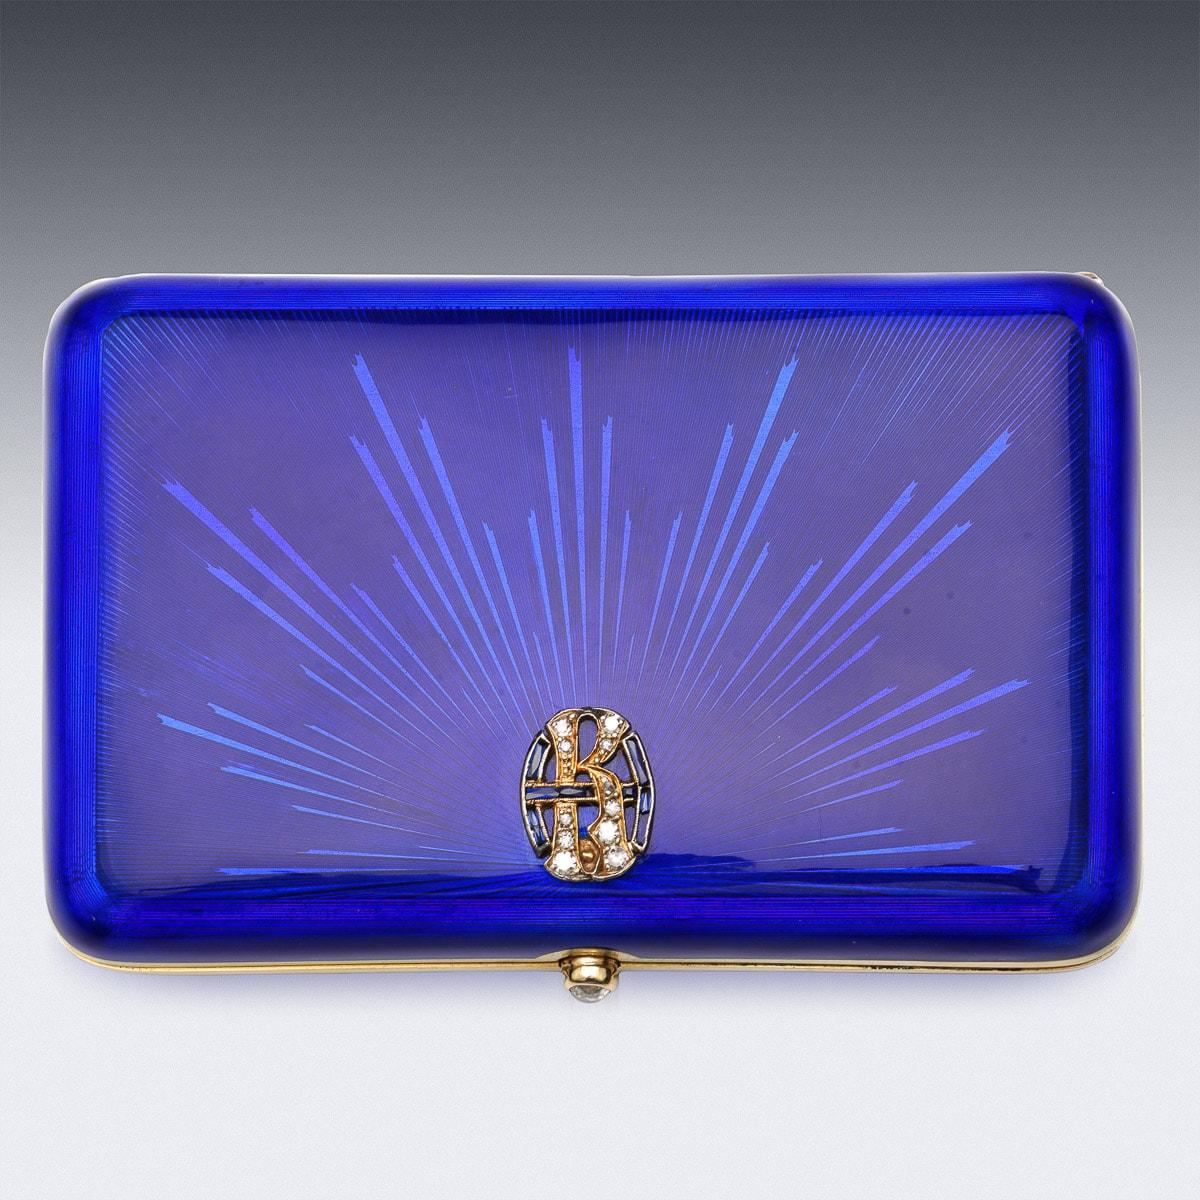 Antique early-20th Century Imperial Russian Faberge cigarette case, applied with vibrant royal blue guilloche enamel on gold, rose-cut diamond-set thumbpiece and lid applied with a sapphire and diamond KH initials.

Hallmarked Russian gold 56 (585